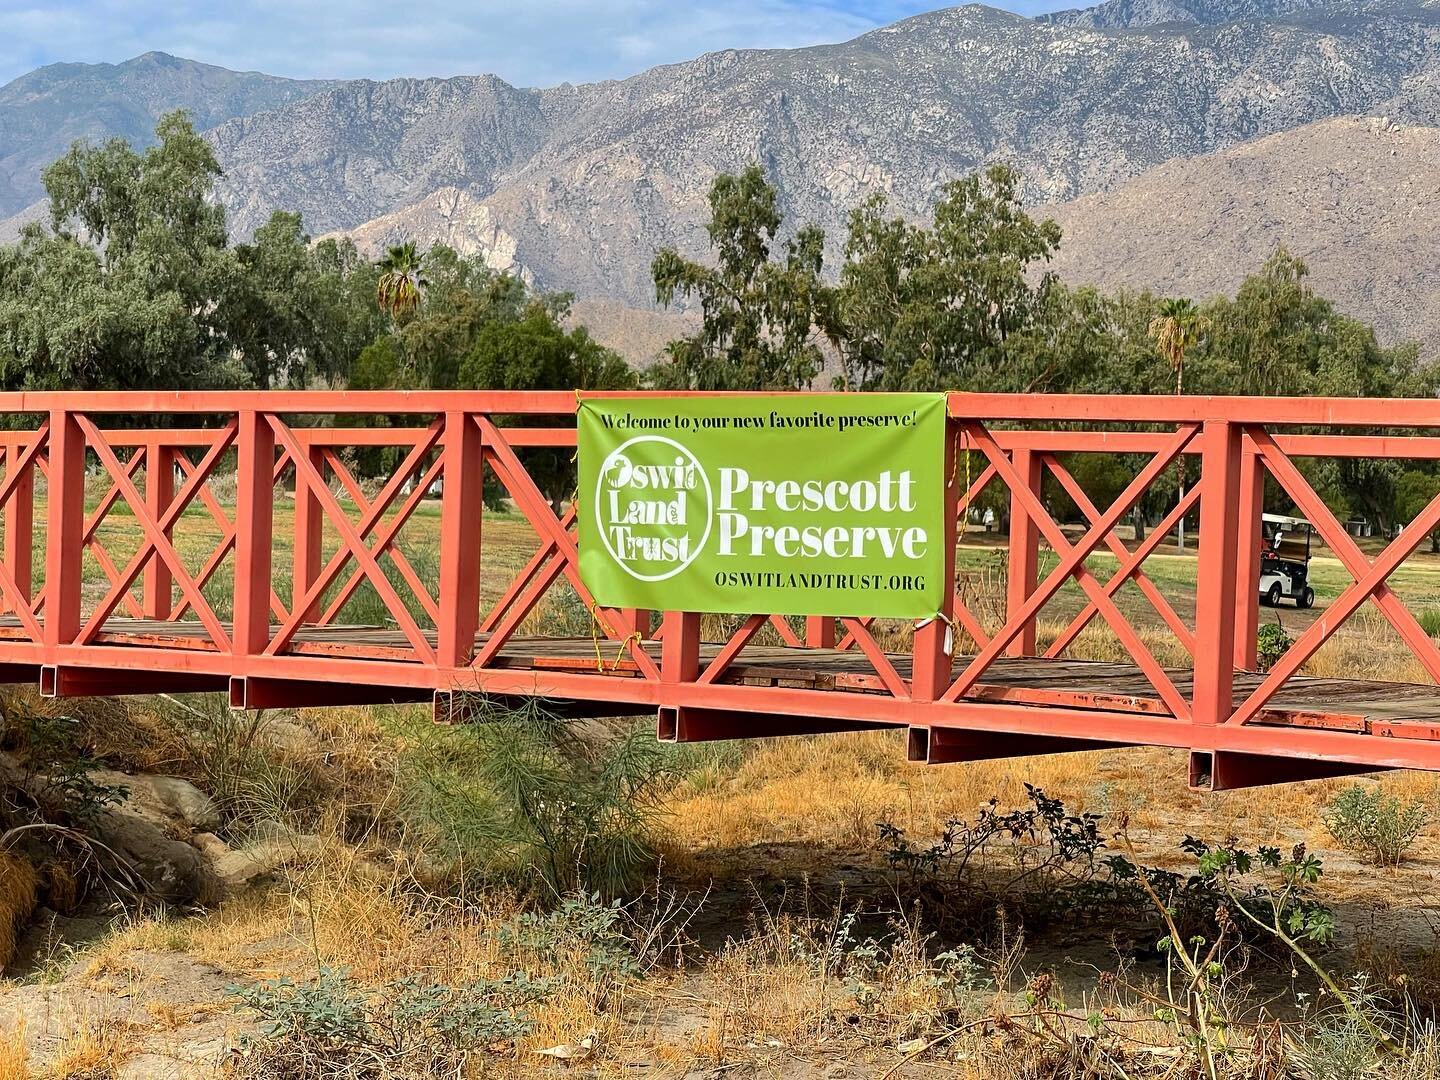 Thanks to the hard work of the Oswit Land Trust, and a seriously generous donation, Palm Springs suddenly has a lot more open space for residents and visitors to enjoy. Introducing #prescottpreserve, formerly the Mesquite Canyon Golf Course. We&rsquo